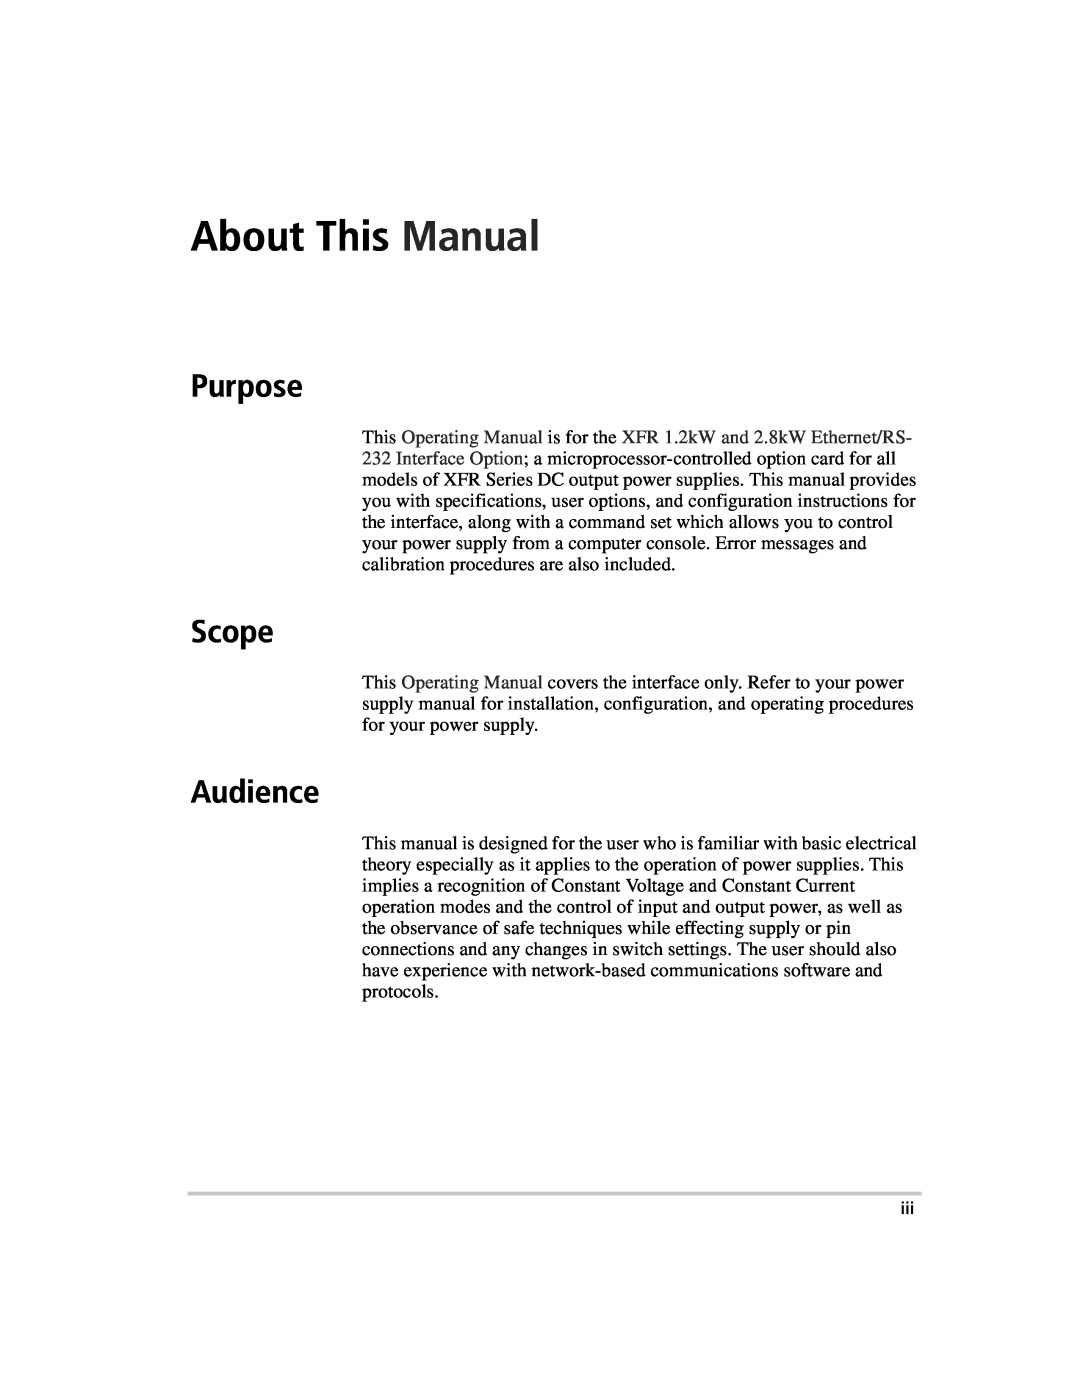 Xantrex Technology ENET-XFR3 manual About This Manual, Purpose, Scope, Audience 